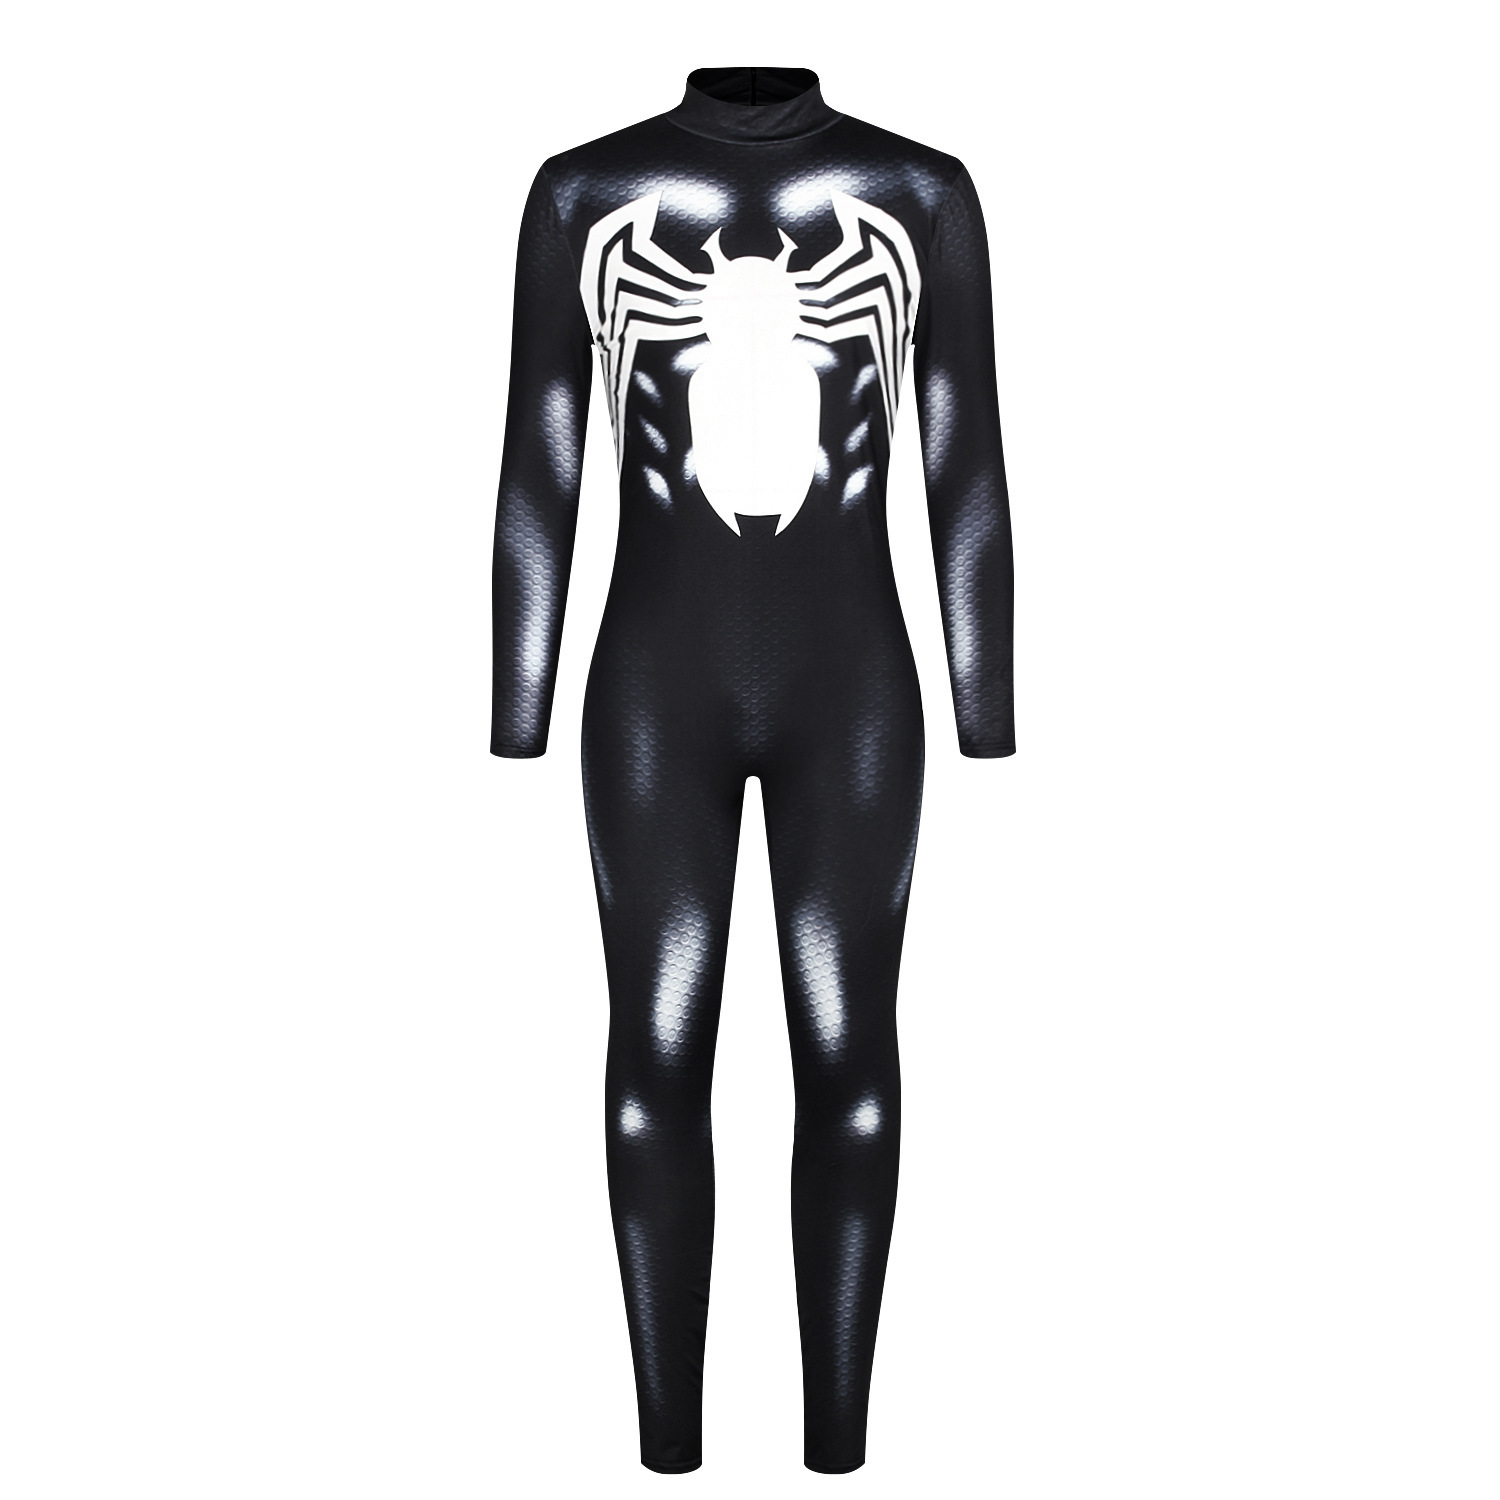 Mens Cosplays Spider Jumpsuit Adult Tight Siamese Adjust Cosplay Costume Size m